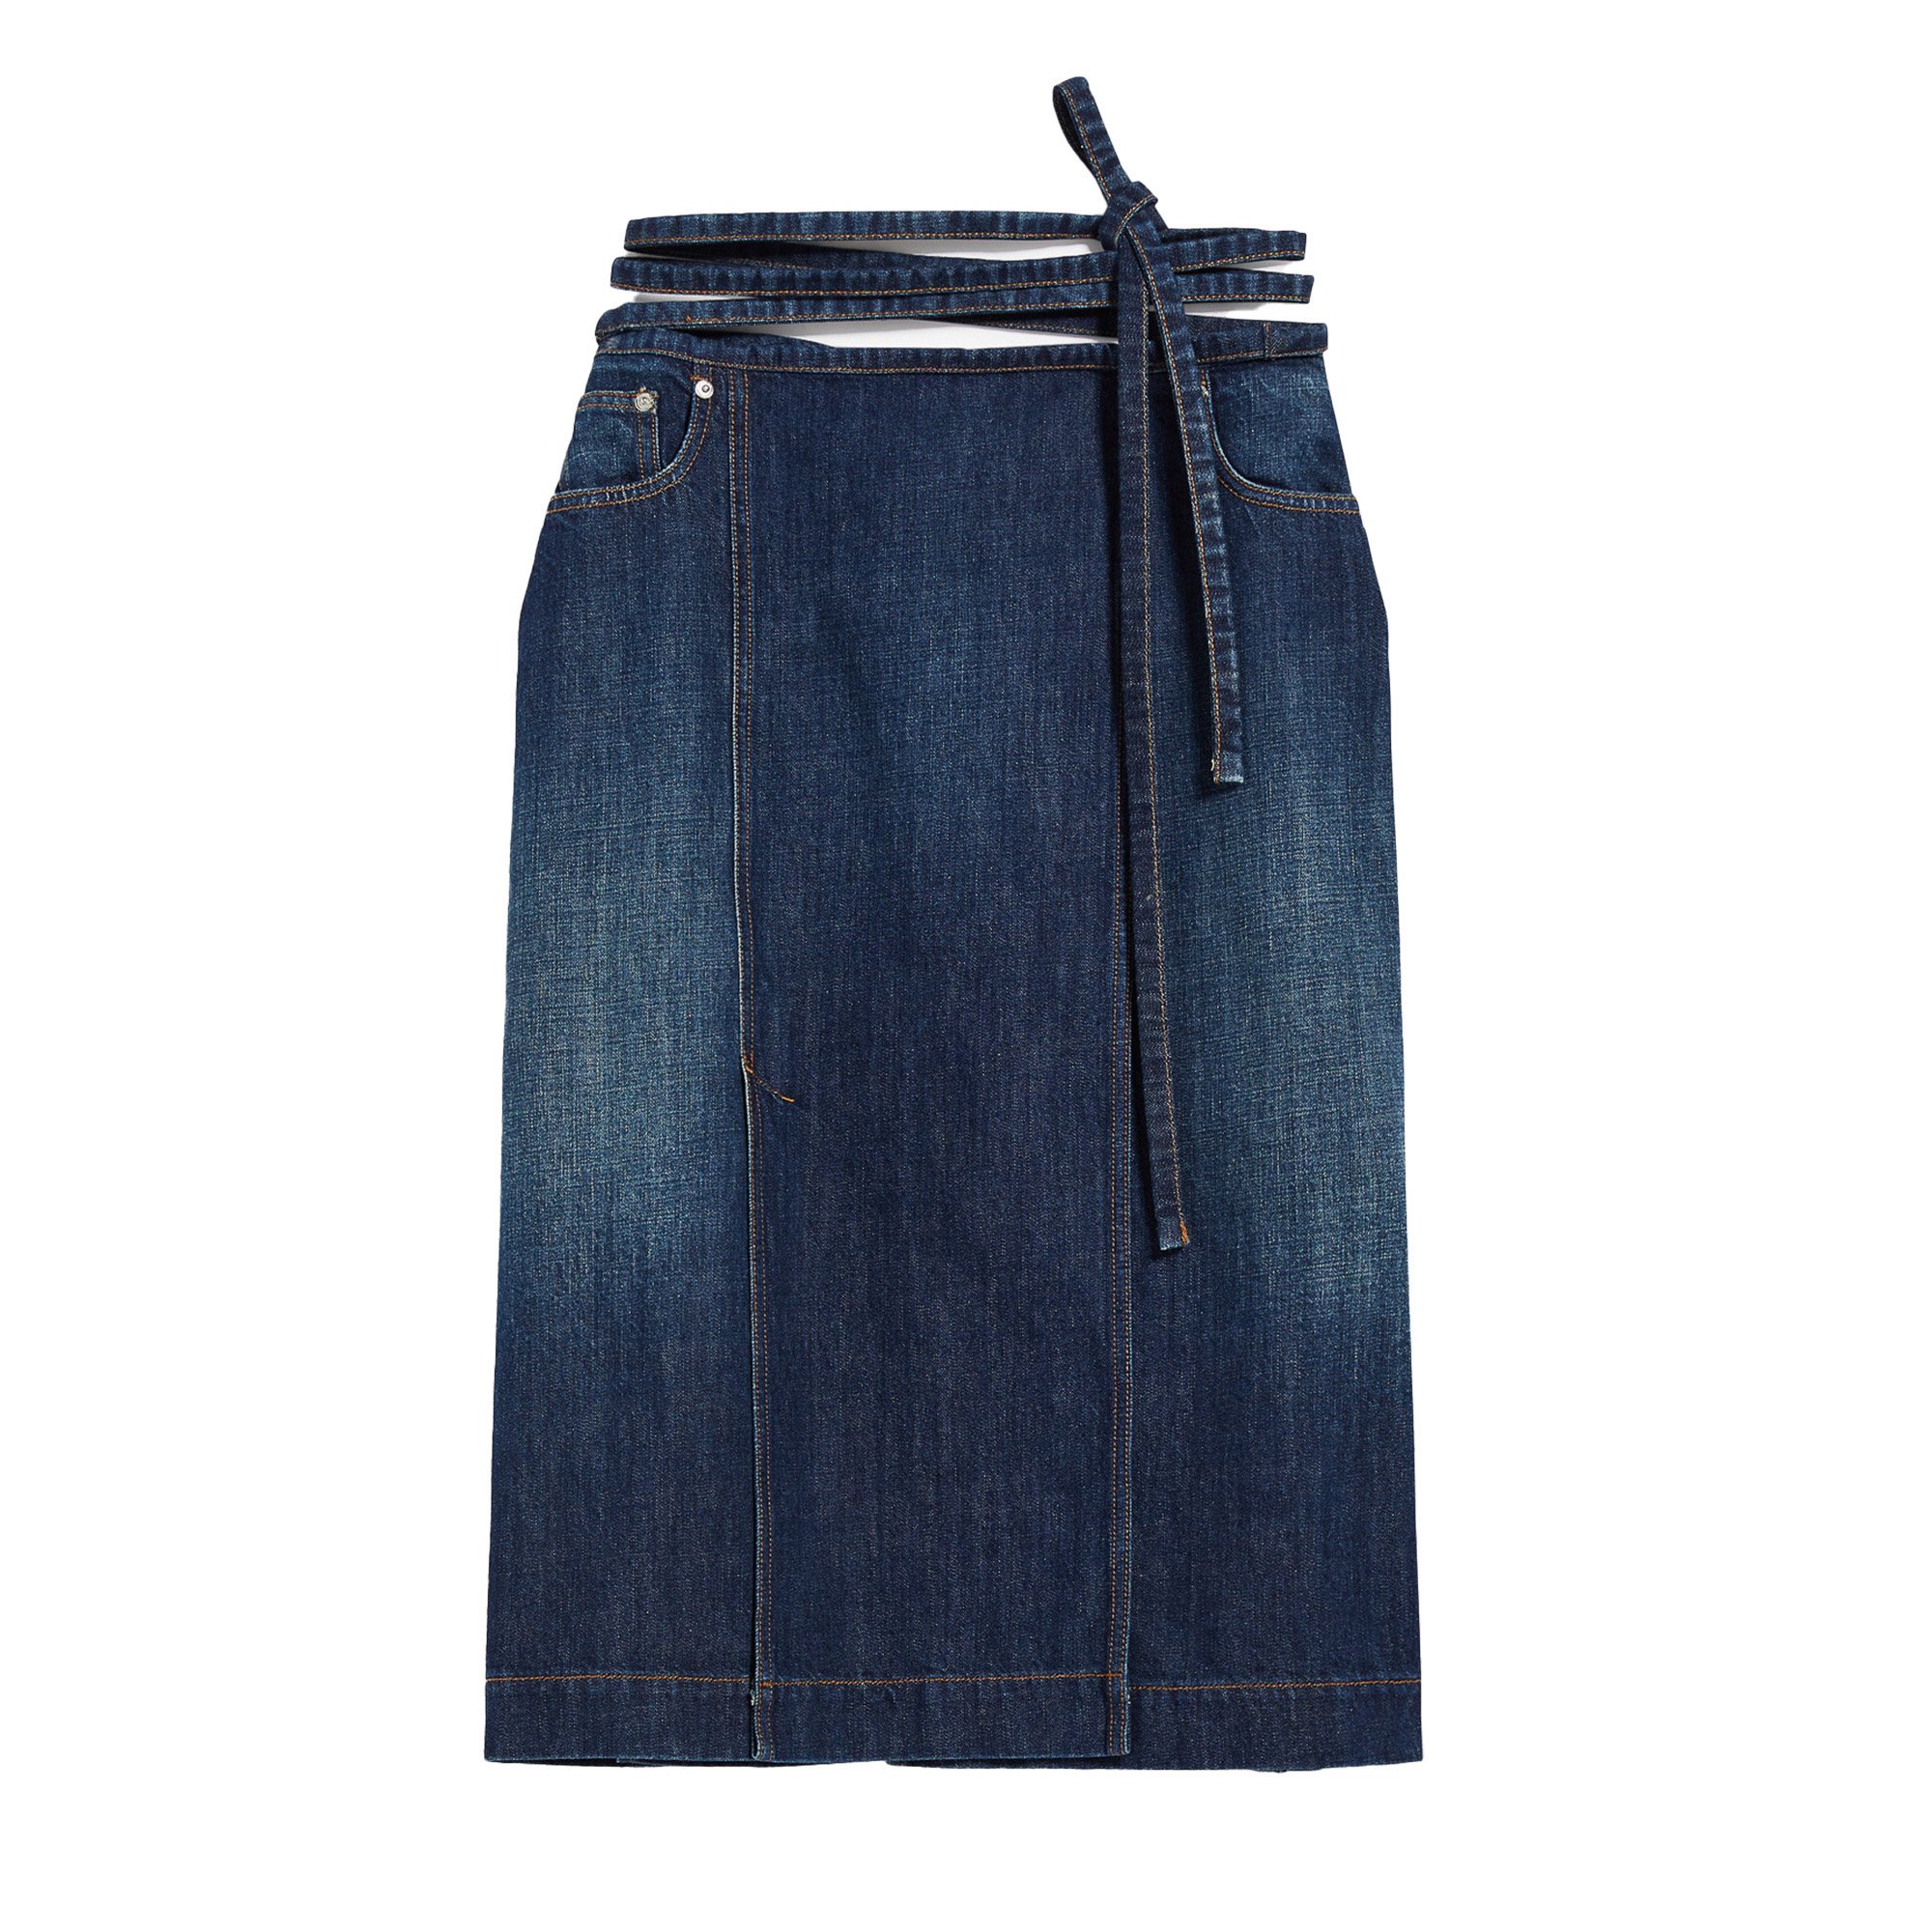 <img class='new_mark_img1' src='https://img.shop-pro.jp/img/new/icons7.gif' style='border:none;display:inline;margin:0px;padding:0px;width:auto;' />SPORT MAX DENIM SKIRT